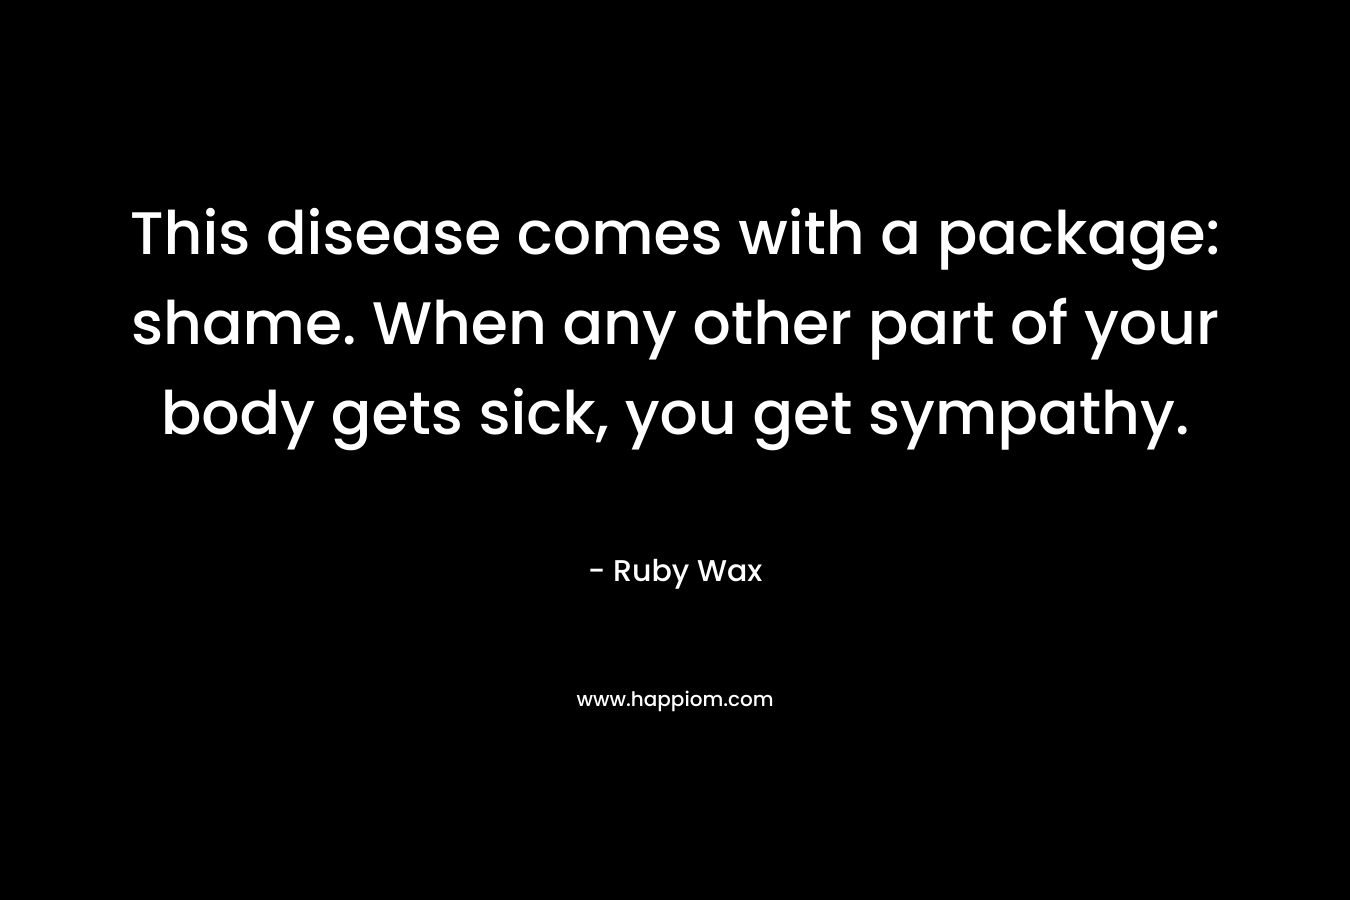 This disease comes with a package: shame. When any other part of your body gets sick, you get sympathy.